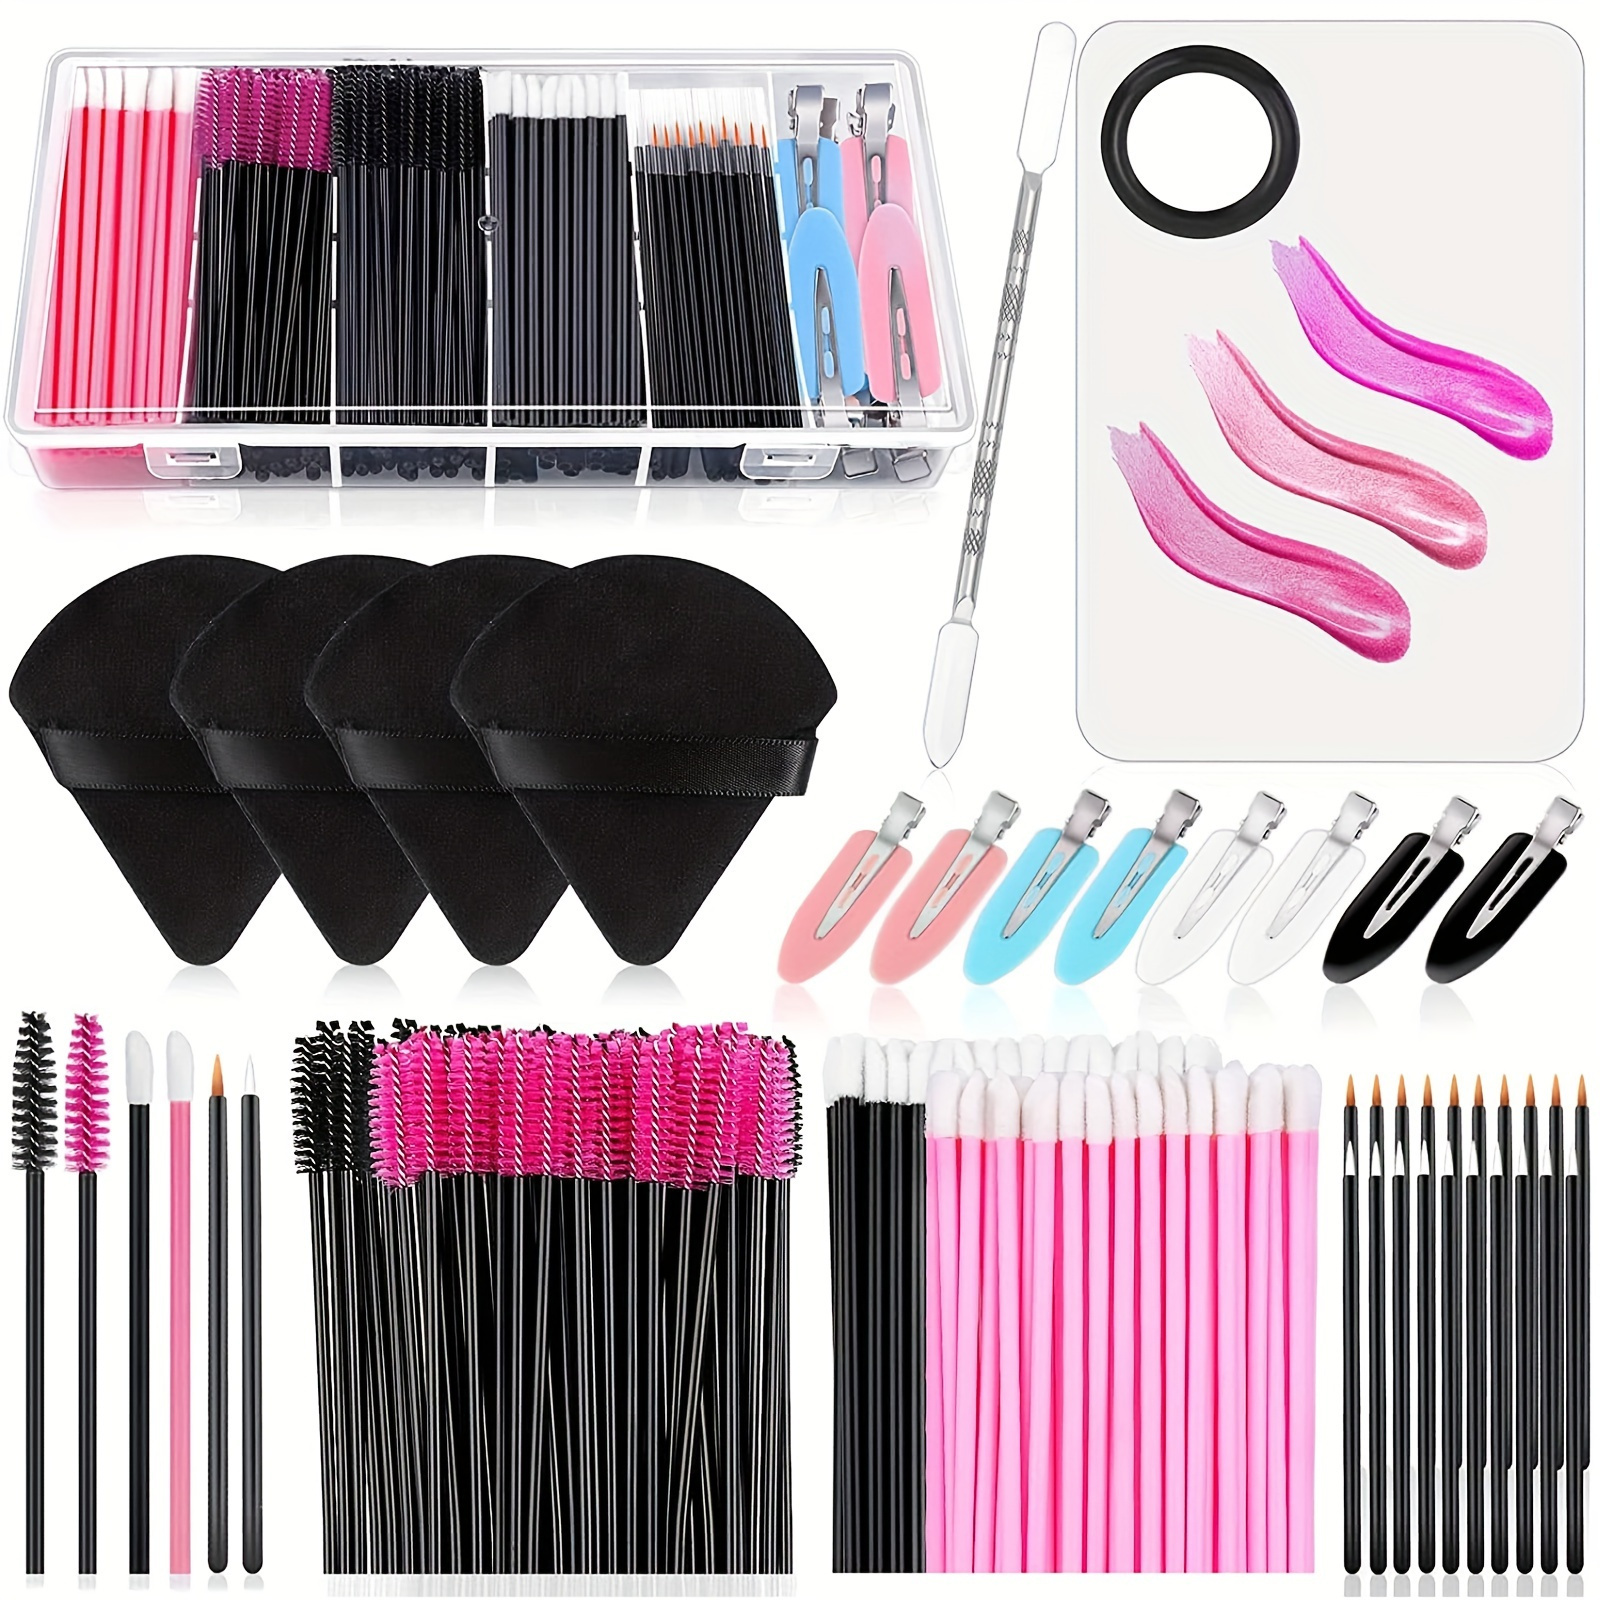 

234pc Makeup Applicators Kit With Triangle Makeup Puff Makeup Mixing Palette Makeup Artist Supplies Mascara Wands, Lip Brushes, Hair Clips Powder Puffs For Face With Storage Box